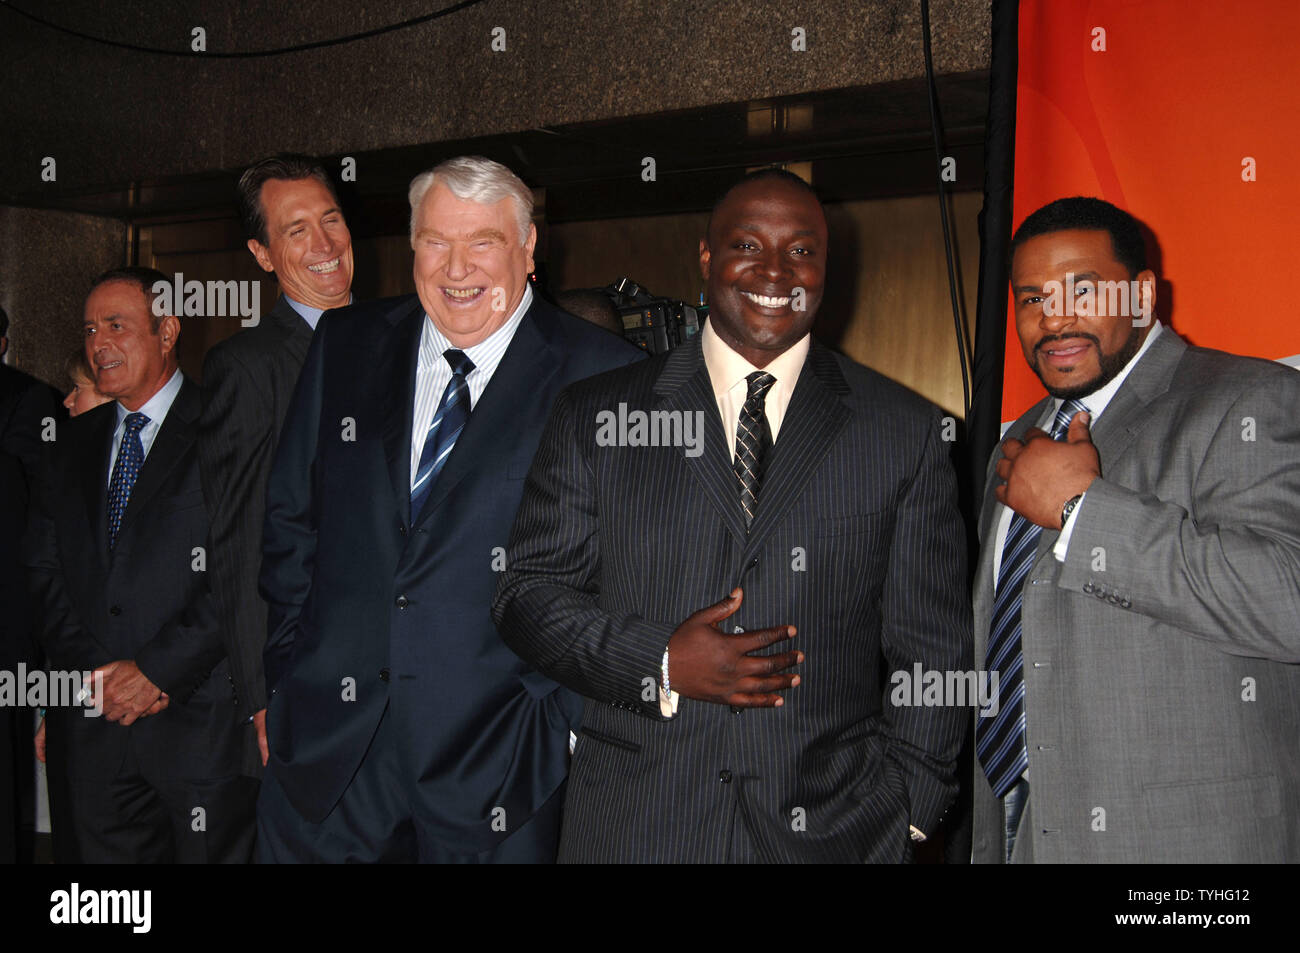 NBC Sports Cast Al Michaels, Chris Collinswoth, John Madden, Sterling Sharpe and Jerome Bettis arrive for the  NBC Primetime Preview of the 2006-2007 Schedule at Radio City Music Hall in New York on May 15, 2006.  (UPI Photo/Robin Platzer) Stock Photo